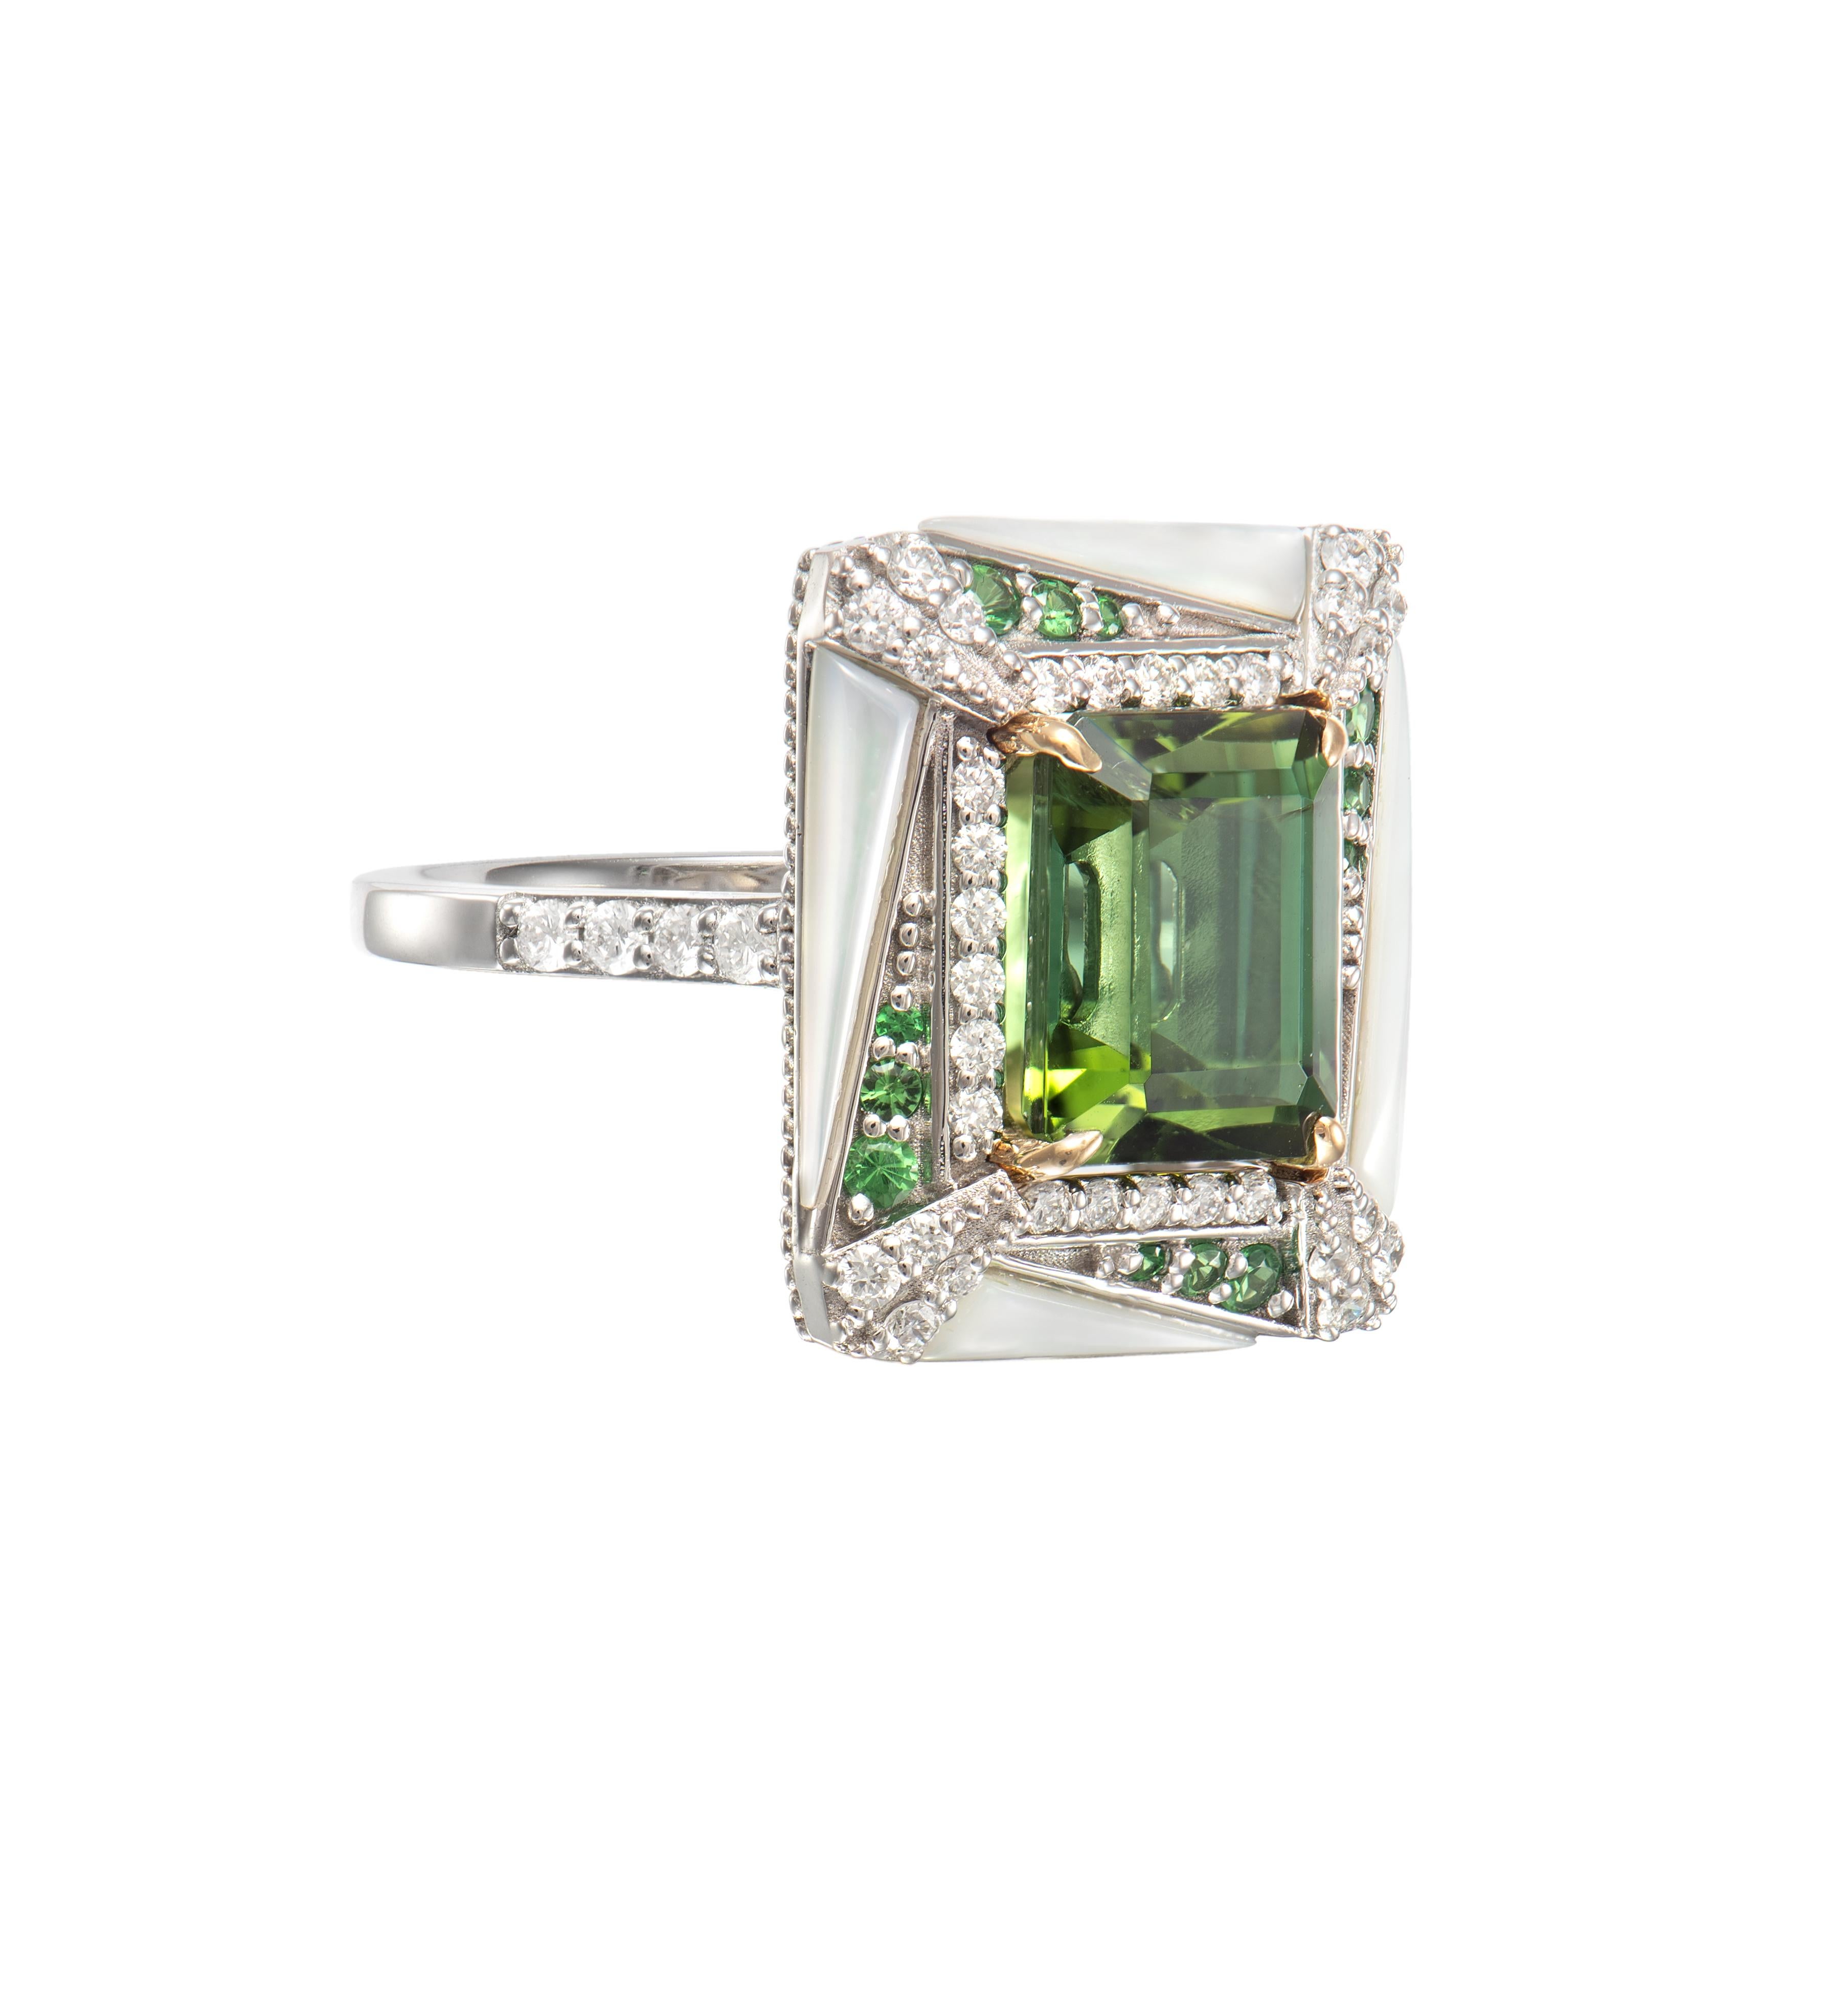 green tourmaline ring meaning